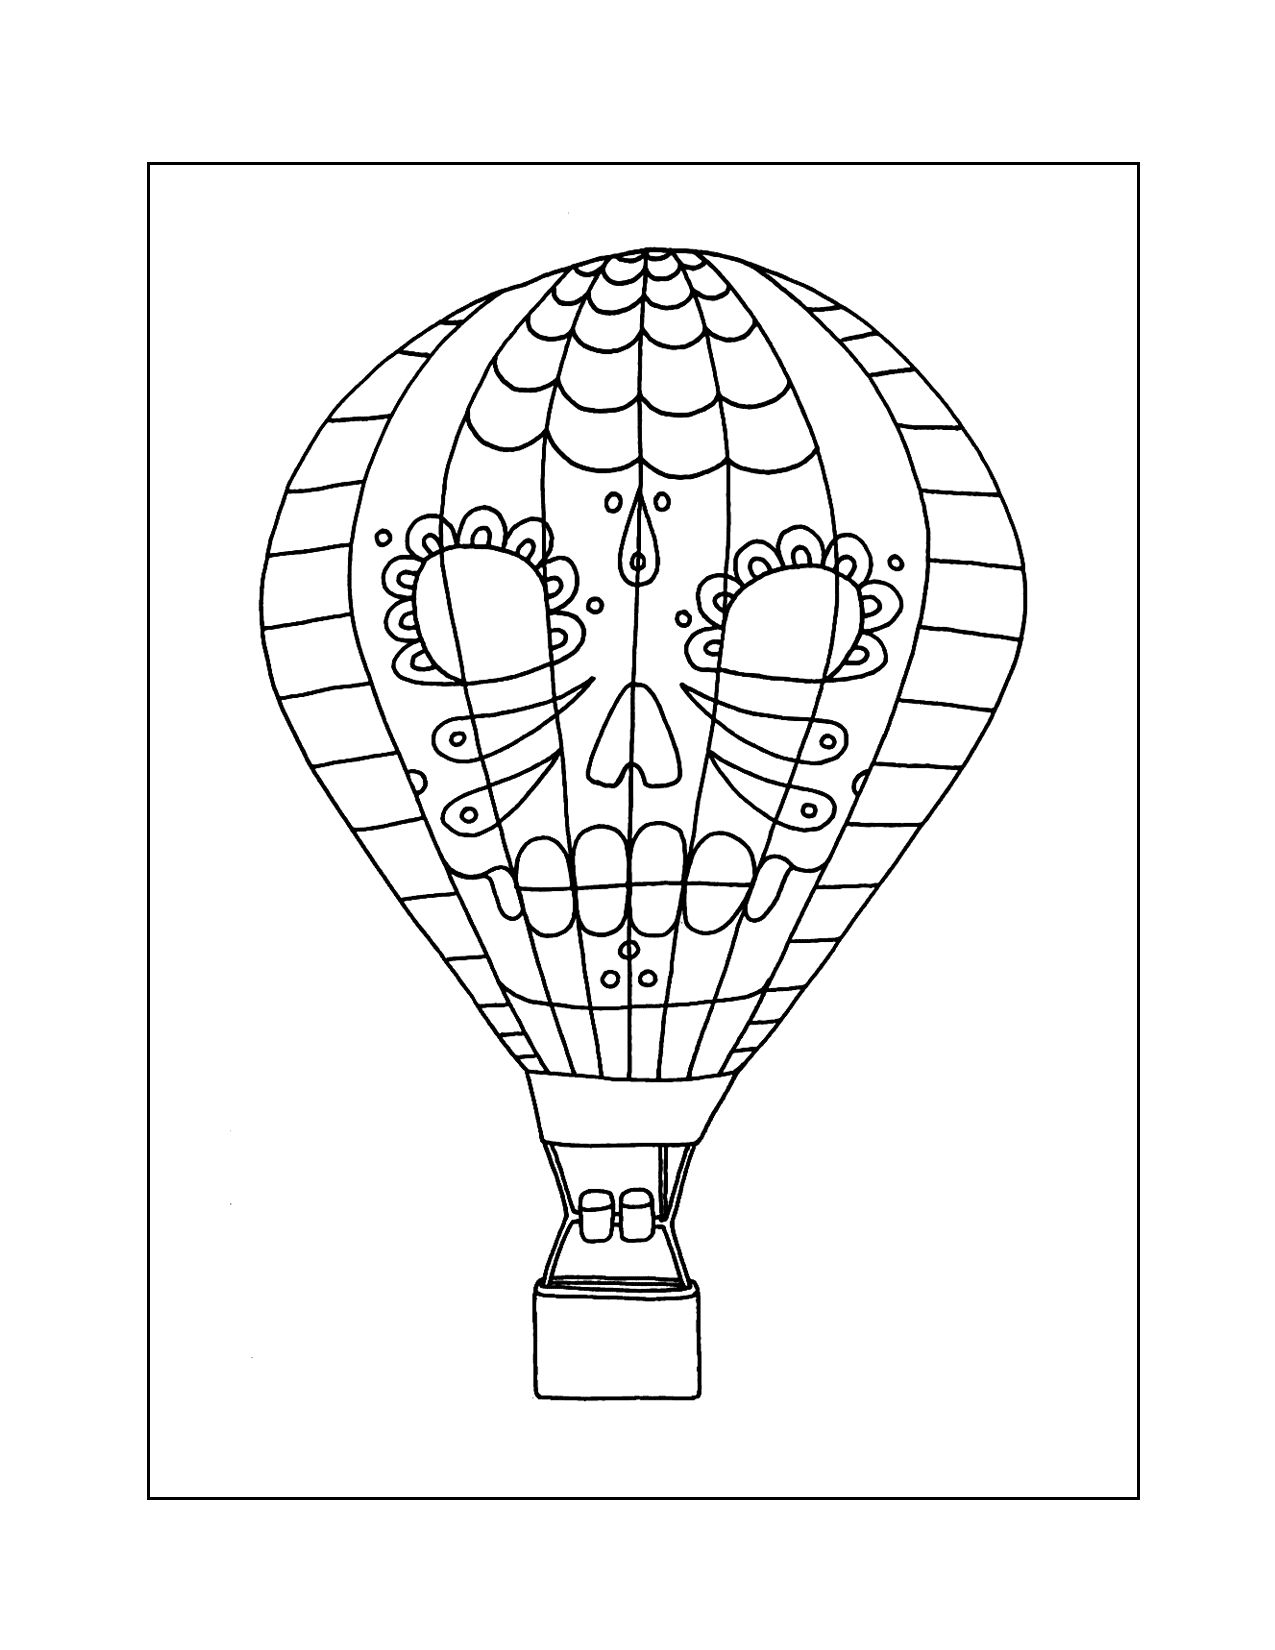 Candy Skull Hot Air Balloon Coloring Page